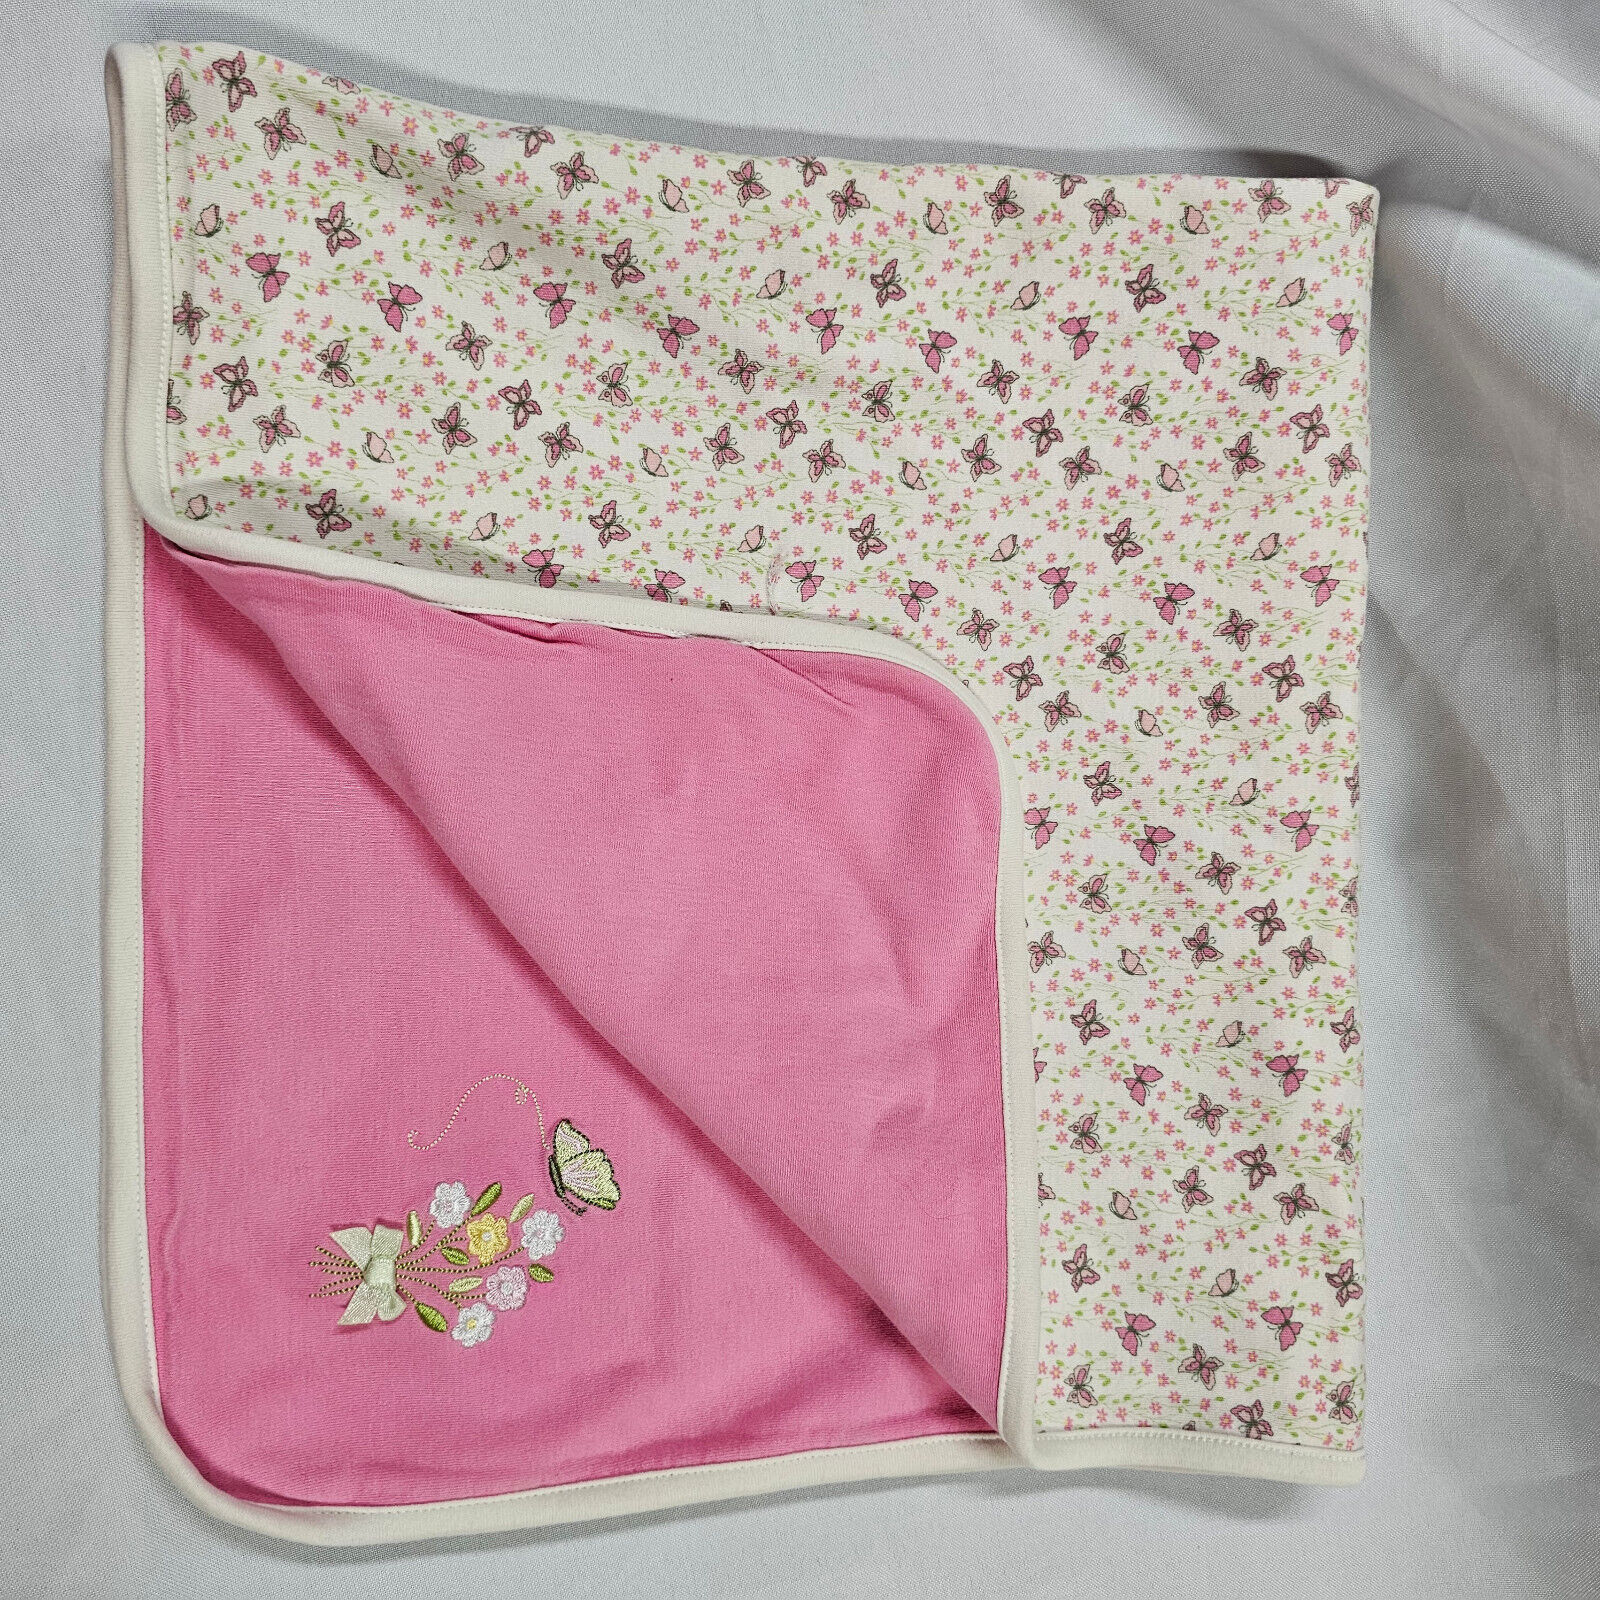 Primary image for Vintage Gymboree 2005 Butterfly Flower Cotton Baby Girl Blanket Pink